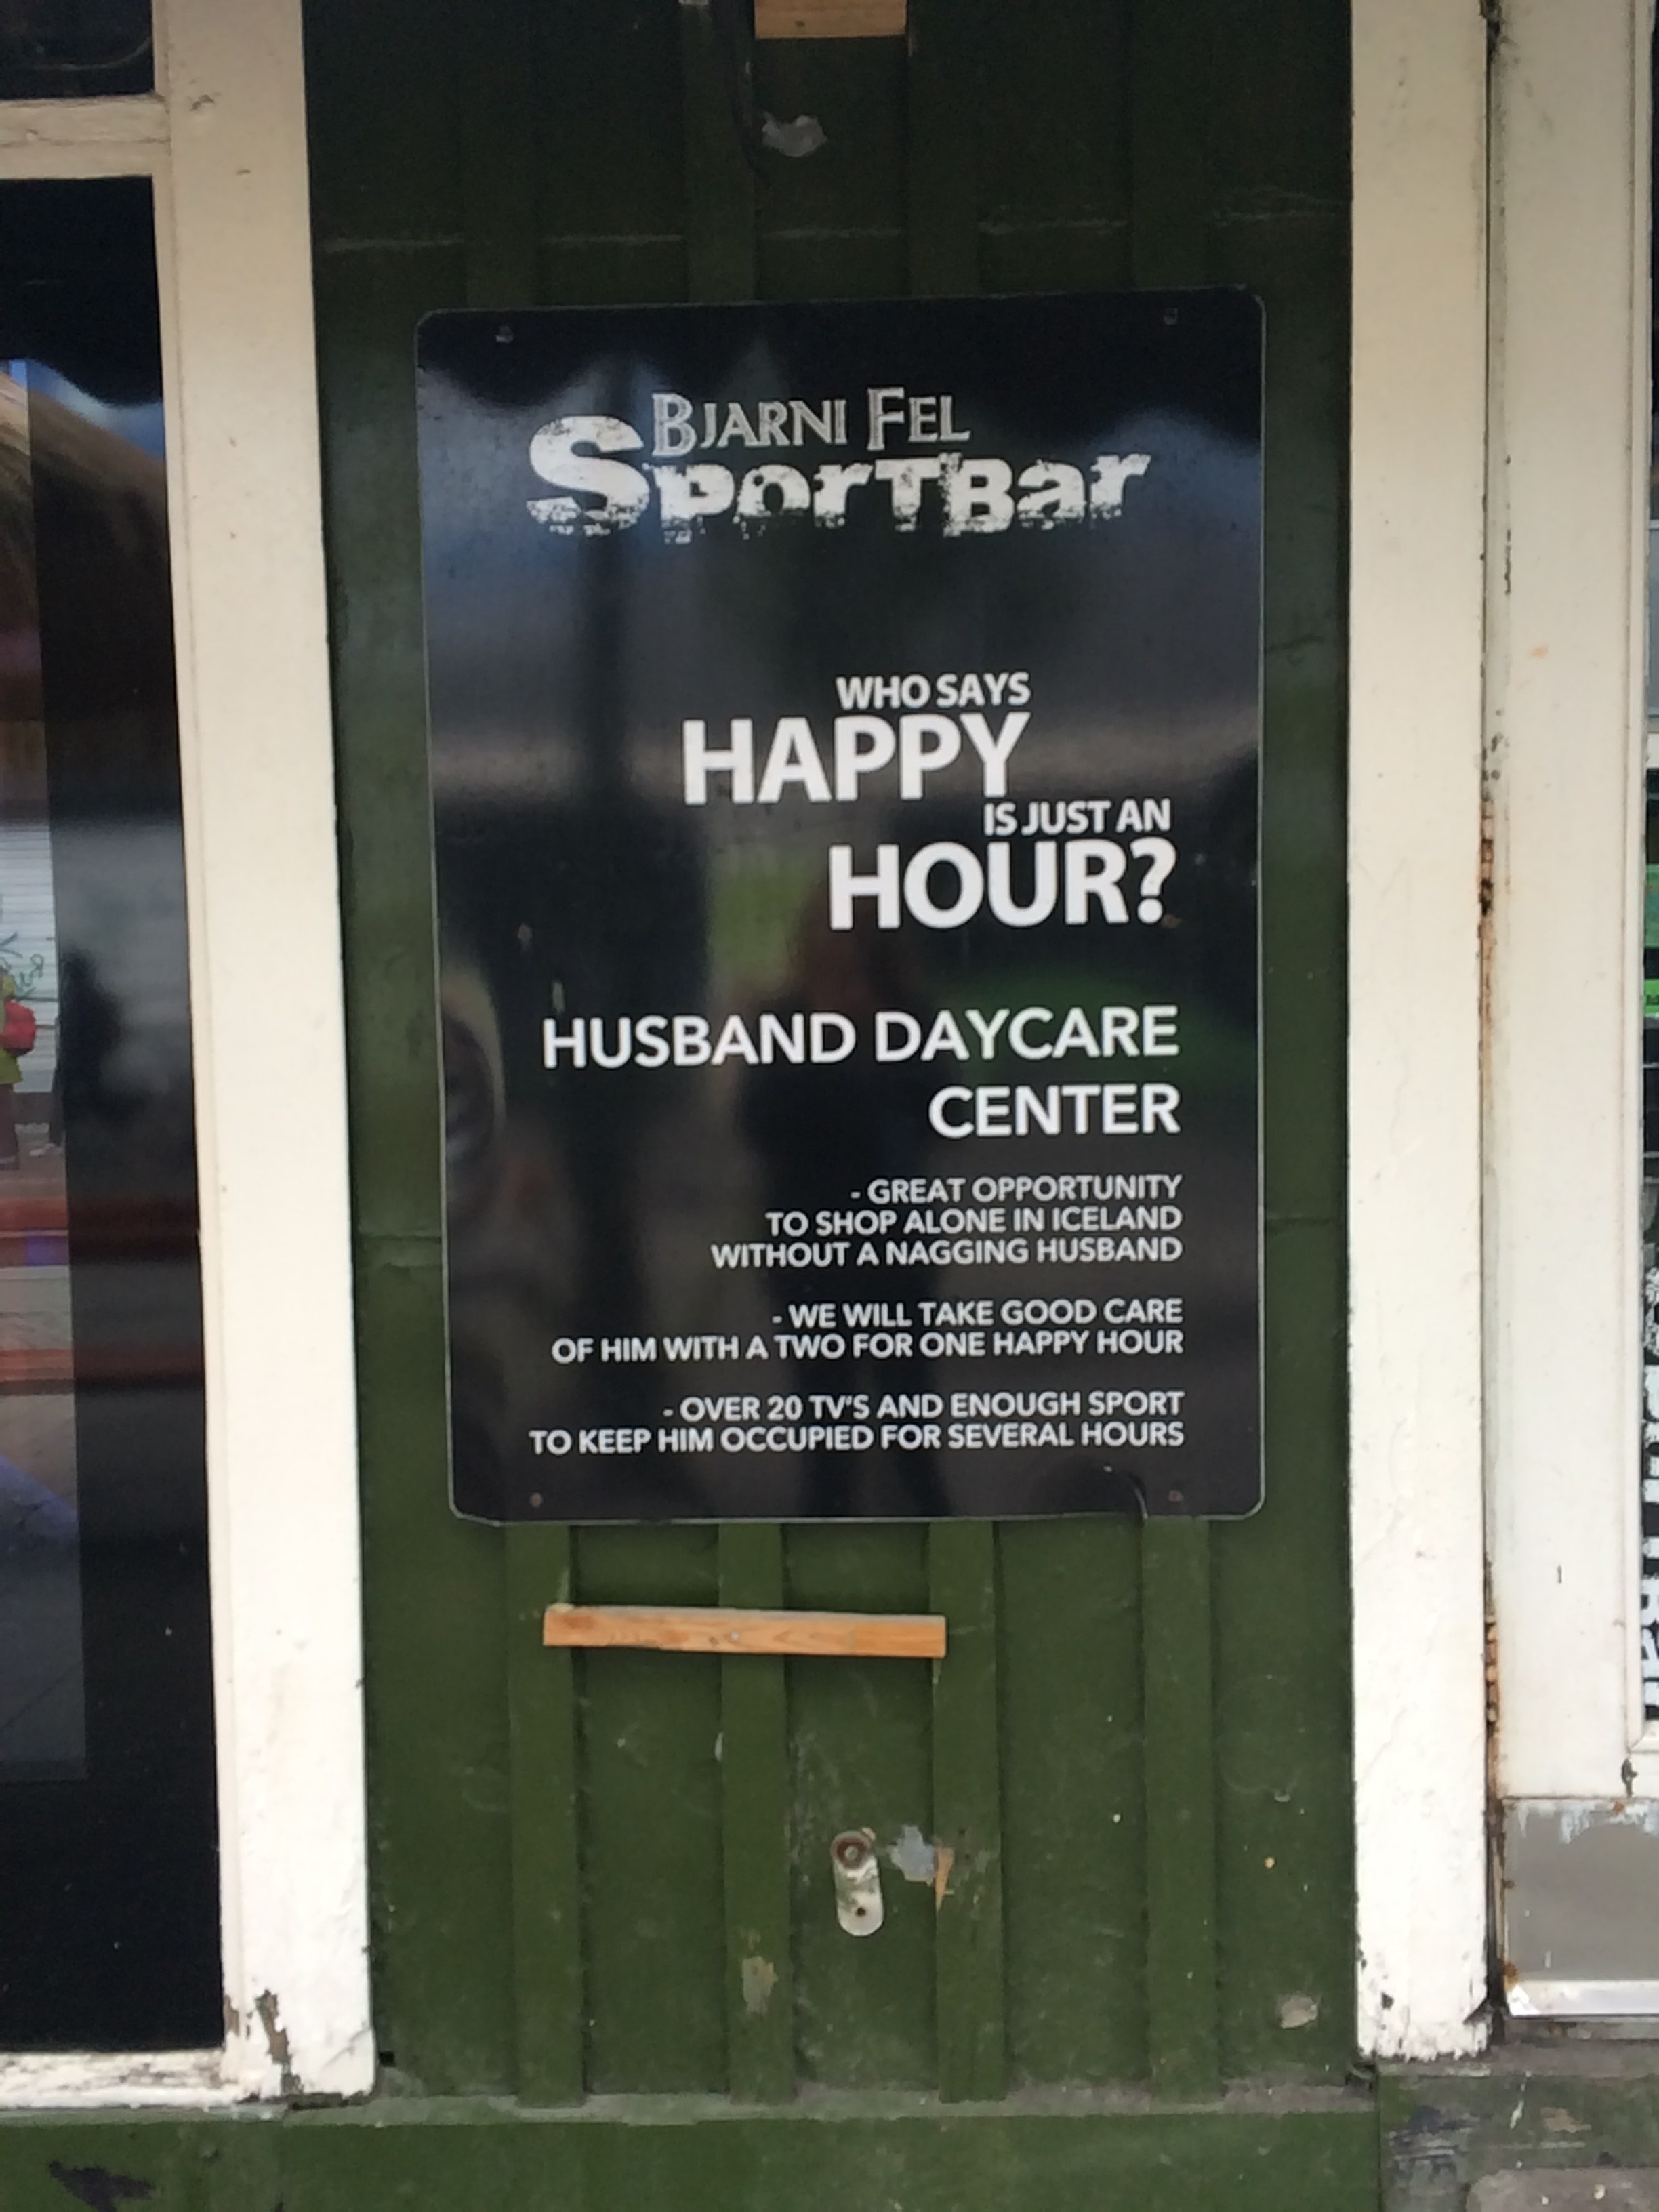 bar that advertises itself as a &quot;husband daycare center&quot;